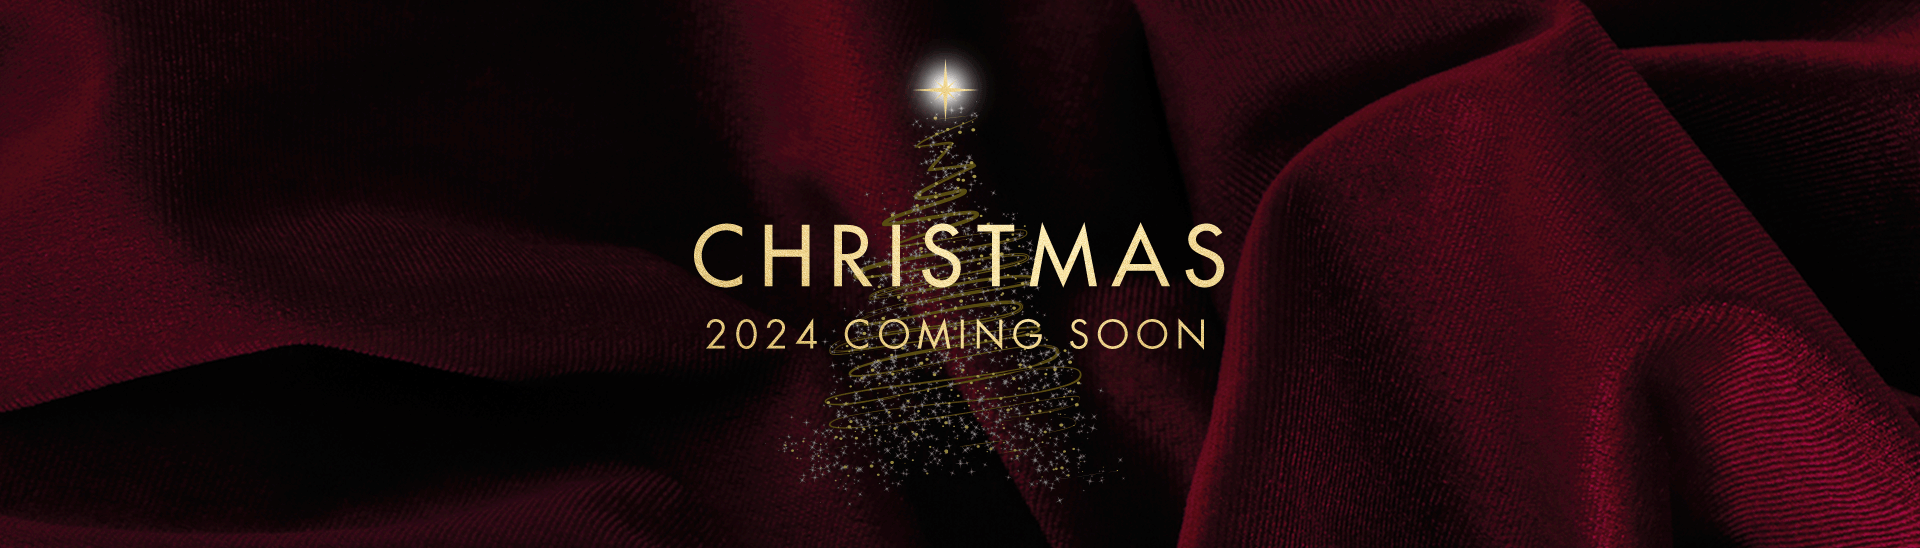 Christmas 2024 at Xscape